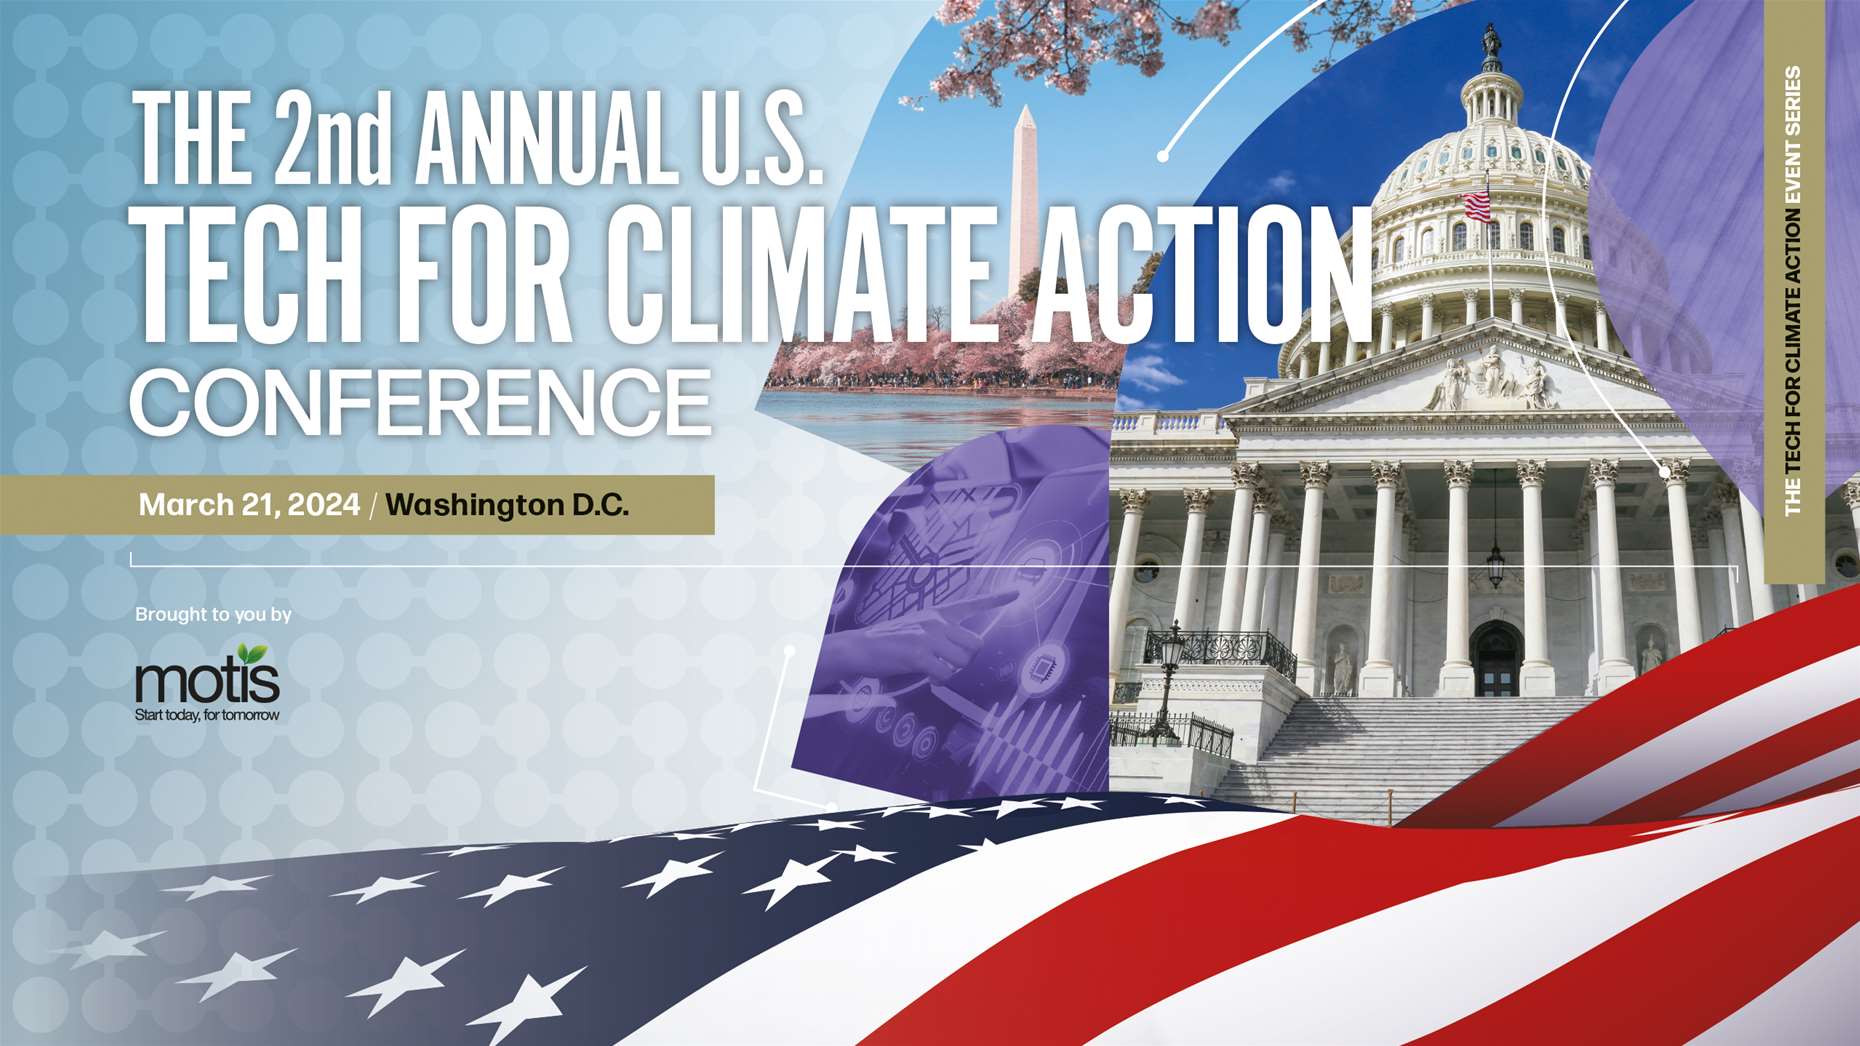 The 2nd Annual U.S. Tech for Climate Action conference 